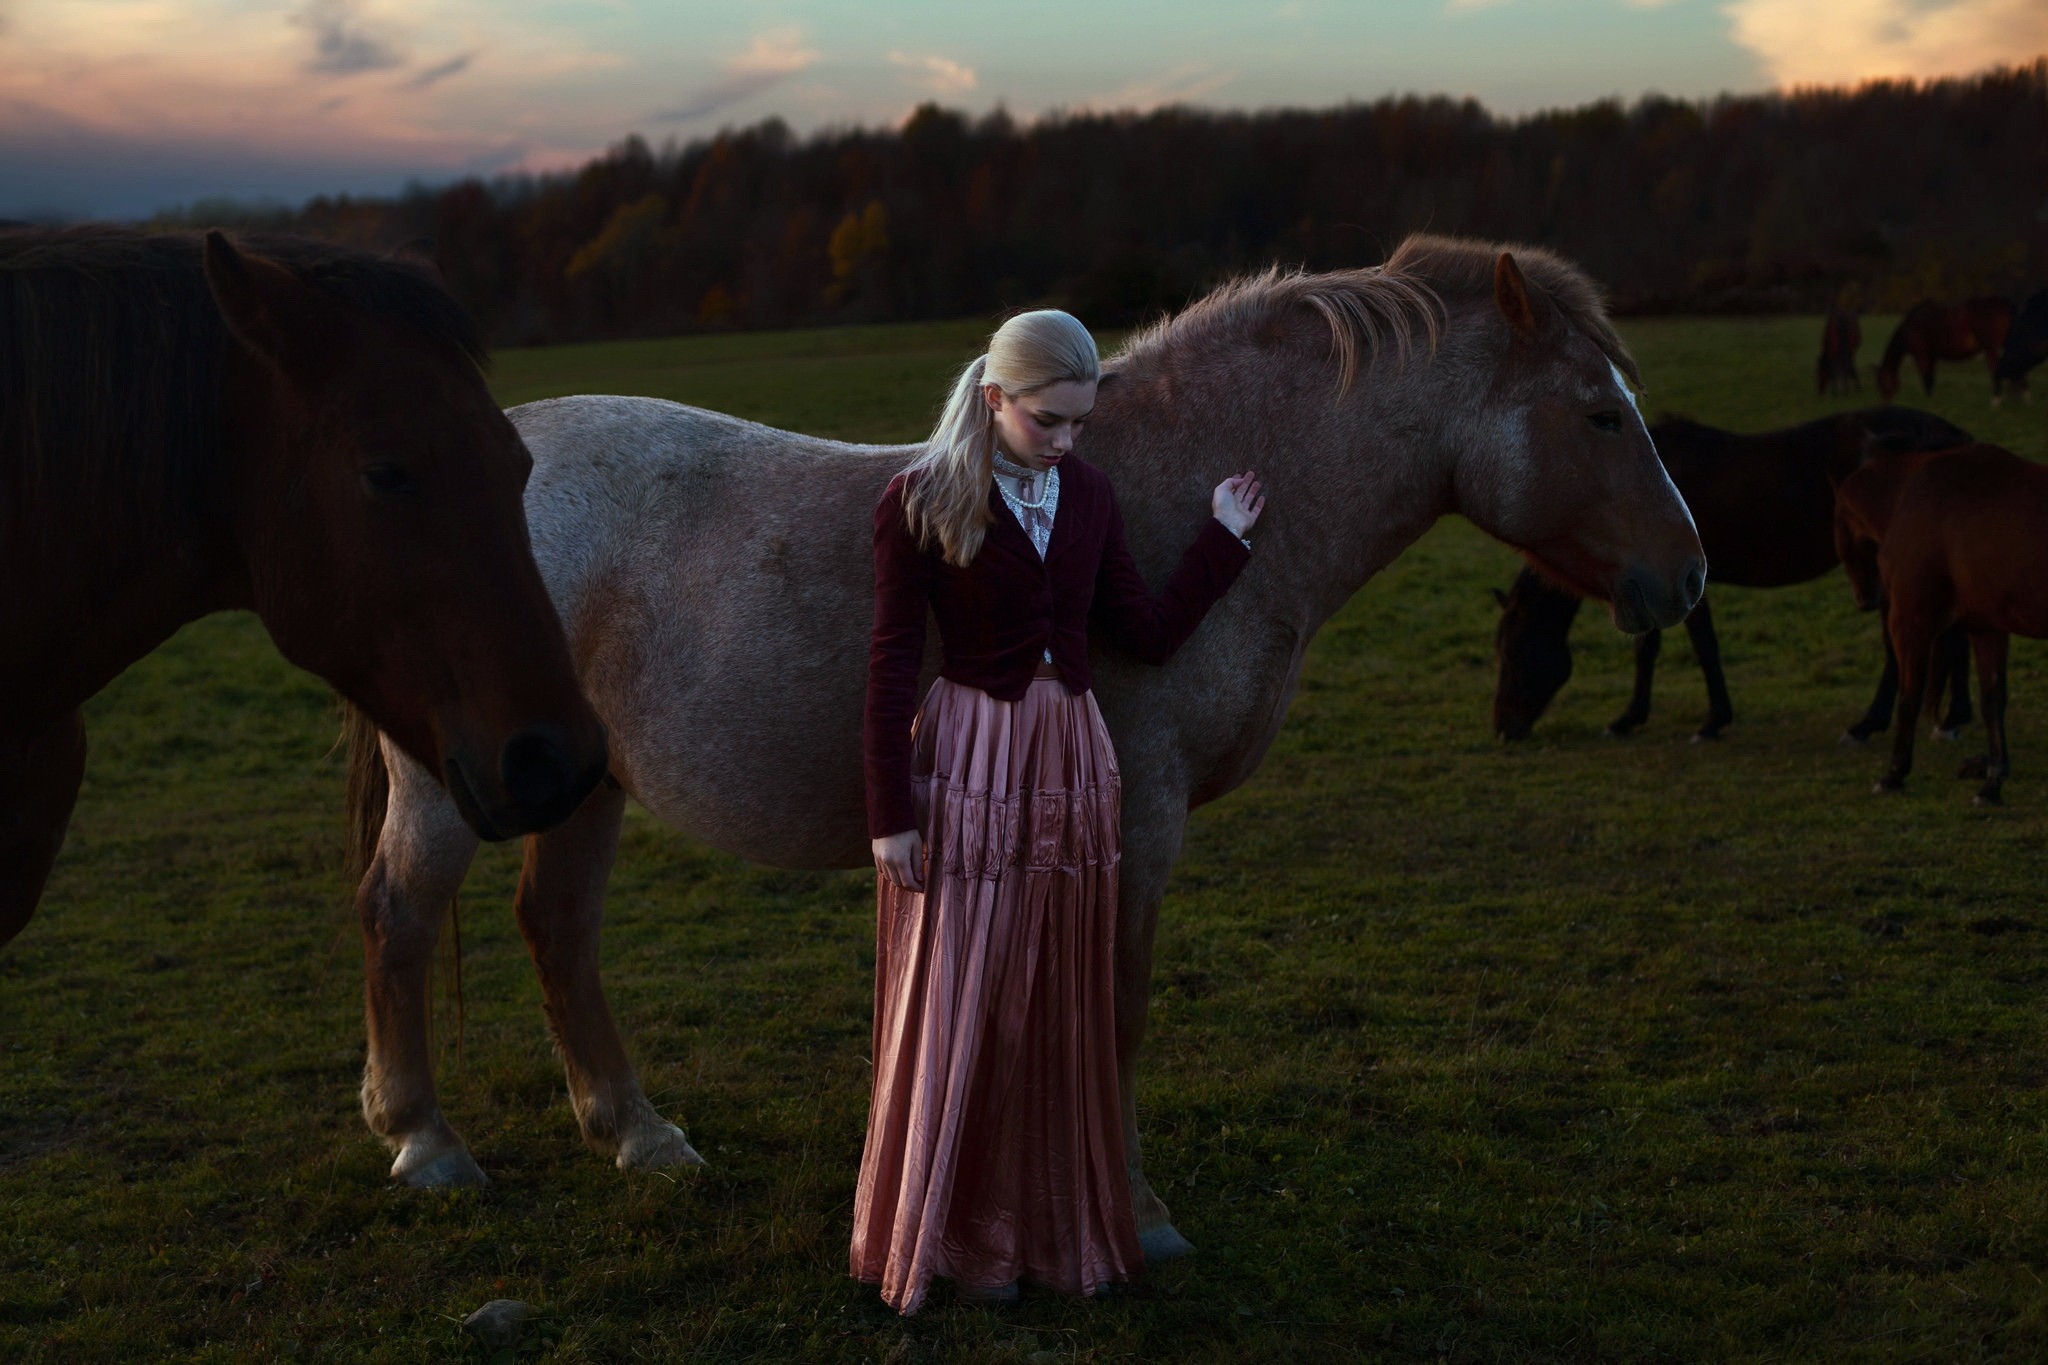 People 2048x1365 horse women women outdoors women with horse blonde ponytail costumes long skirt pink skirt suits closed eyes outdoors dress mammals standing